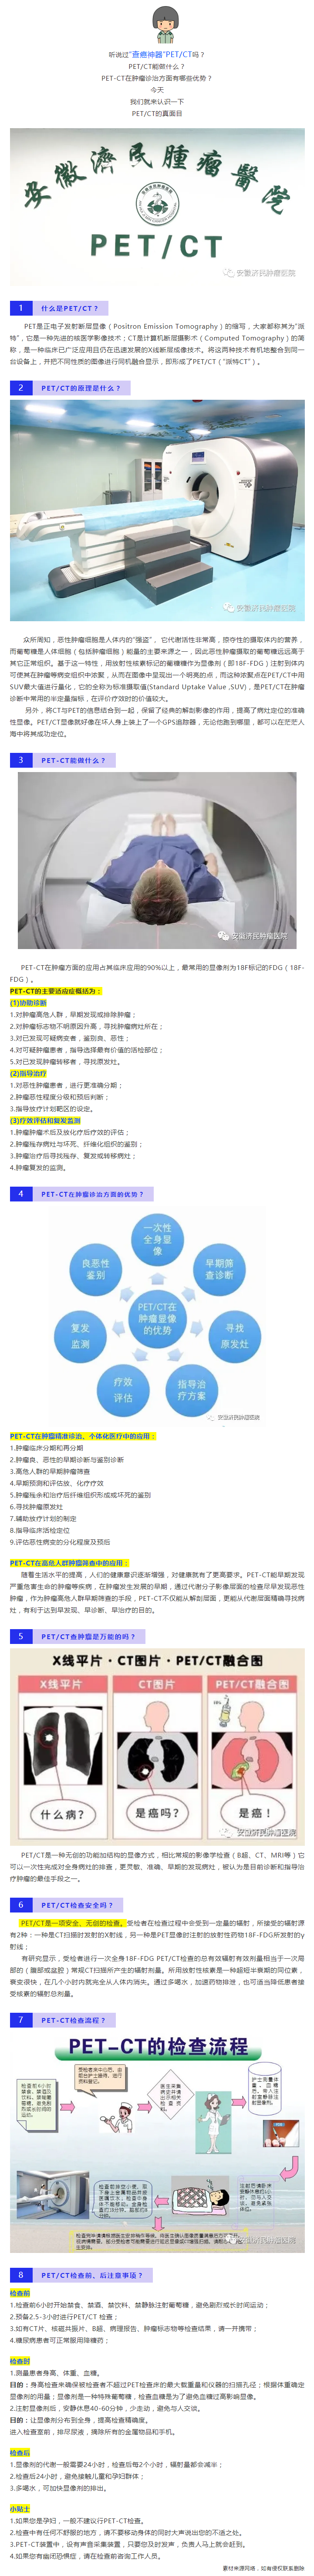 【PET-CT】肿瘤精准诊疗之利器(1).png